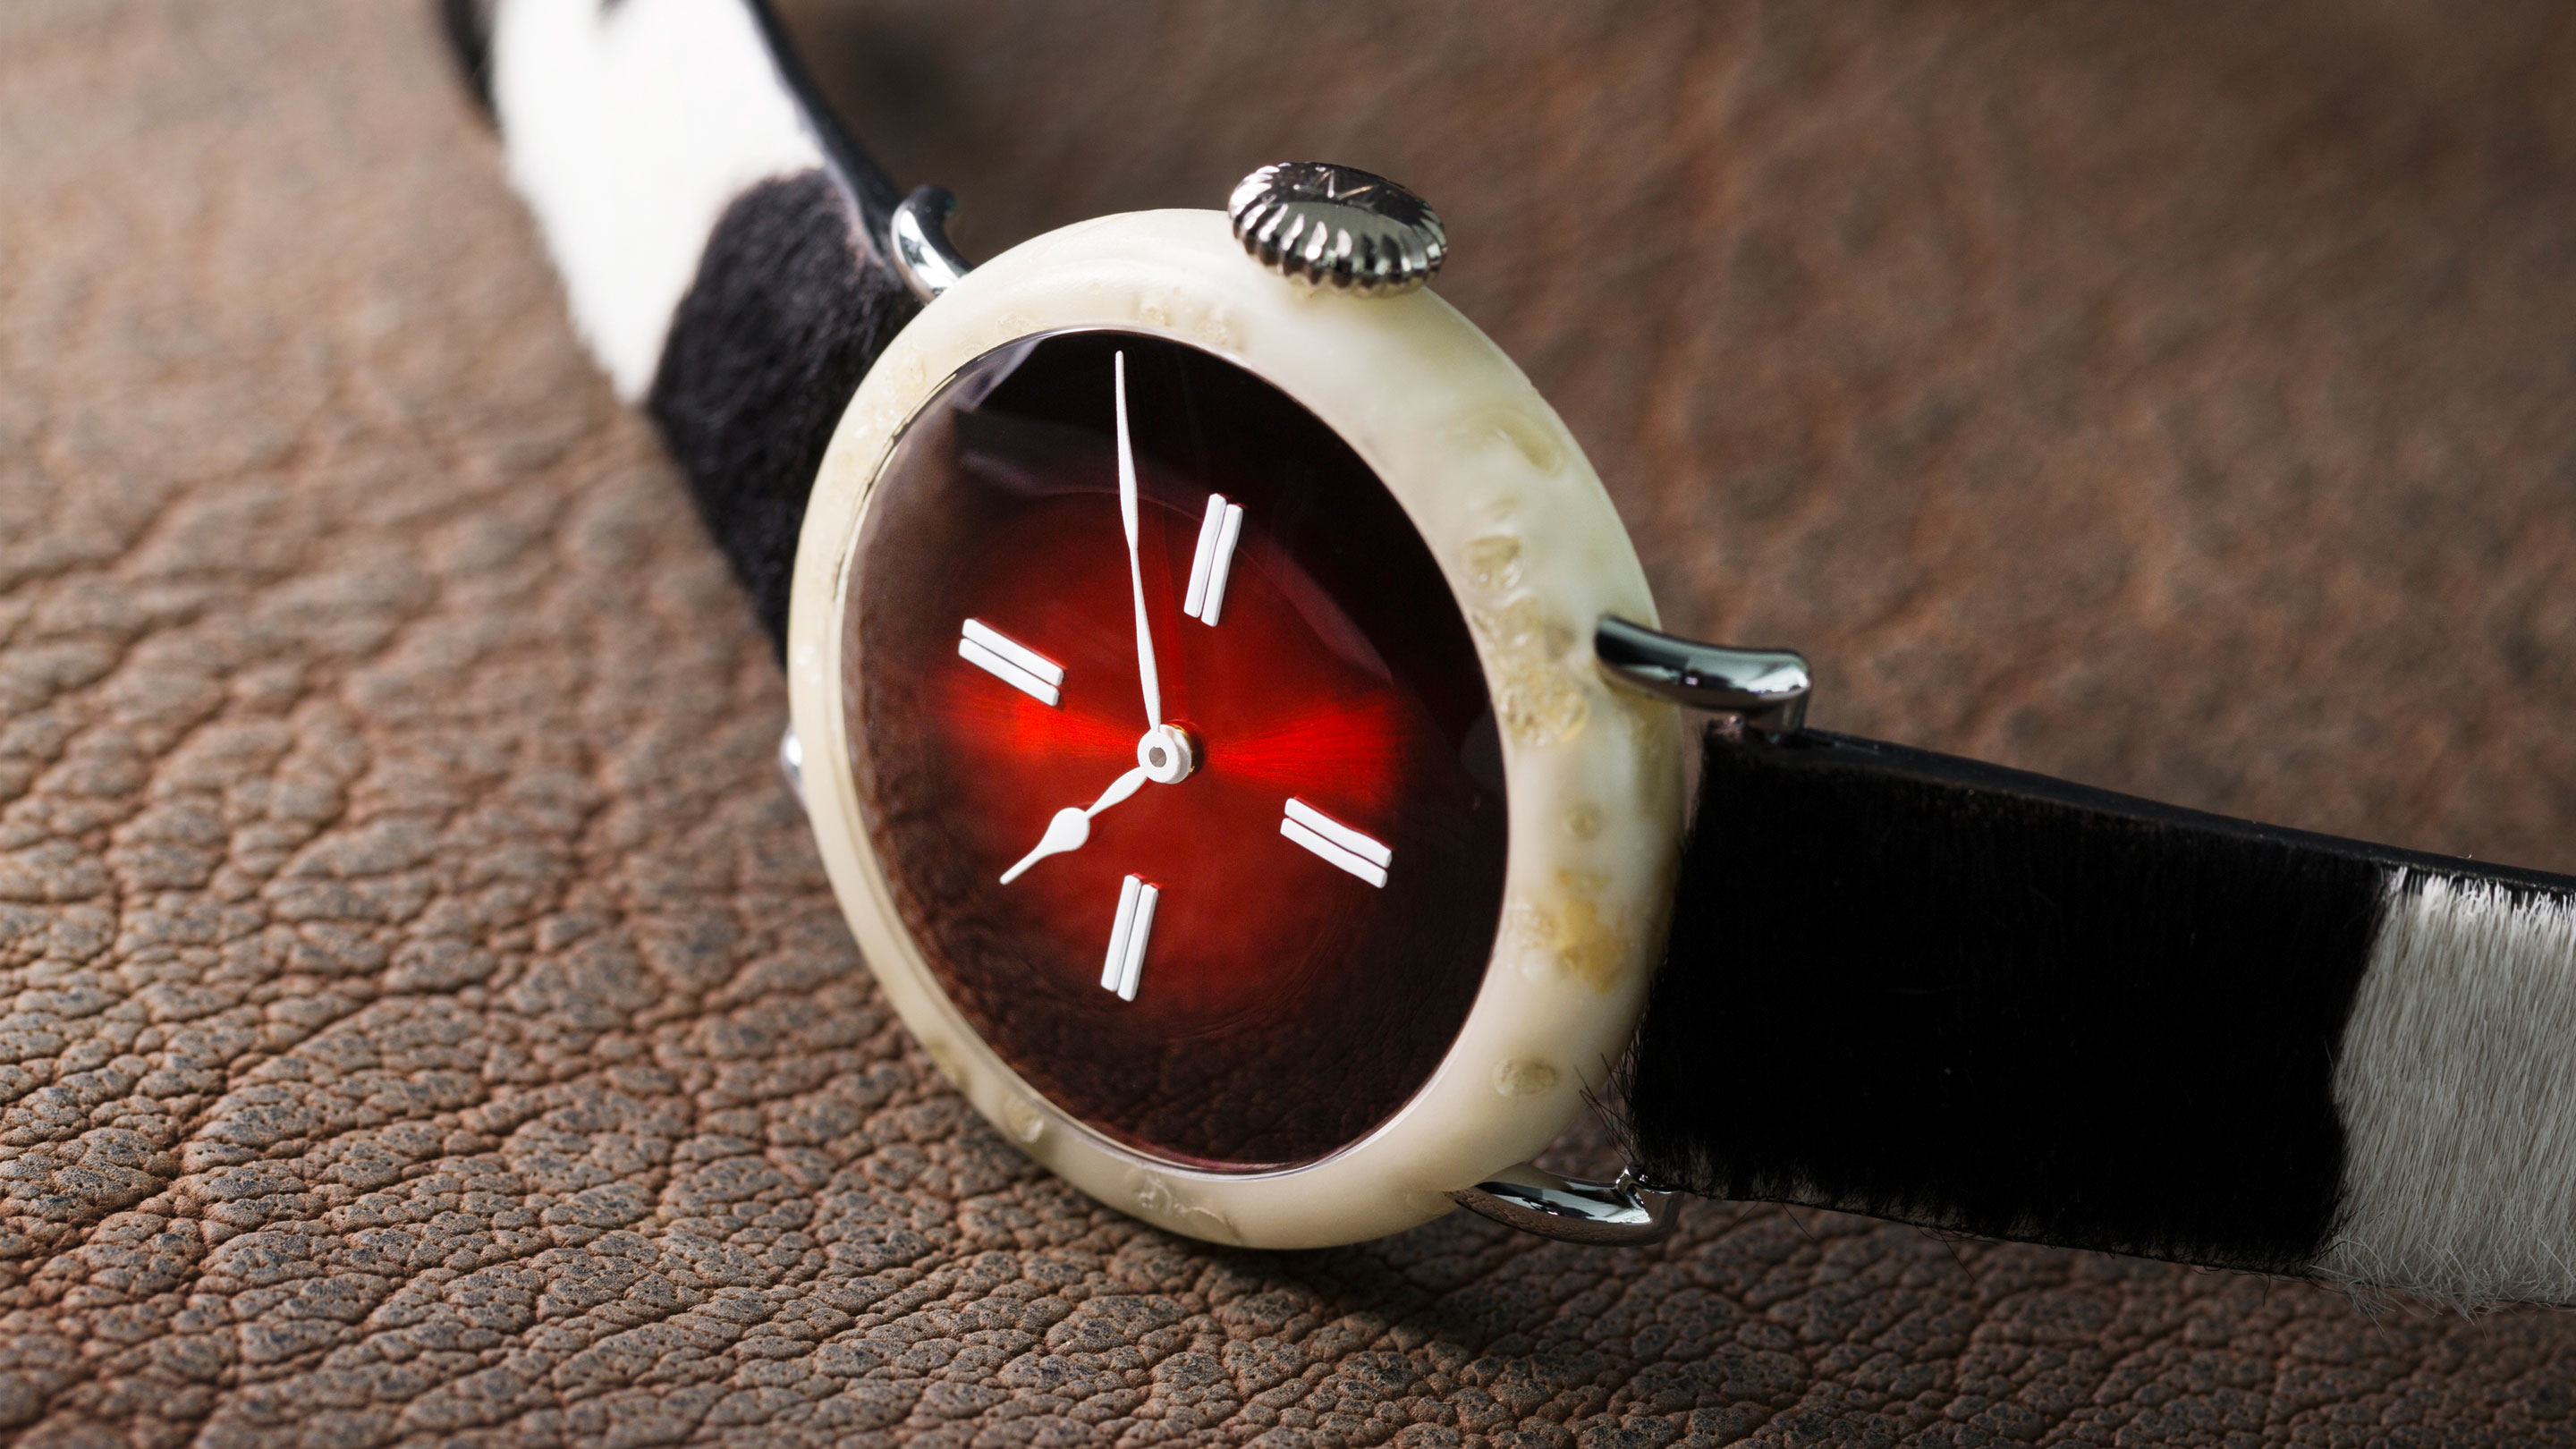 Introducing: The H. Moser Swiss Mad Watch, With A Case Made Of